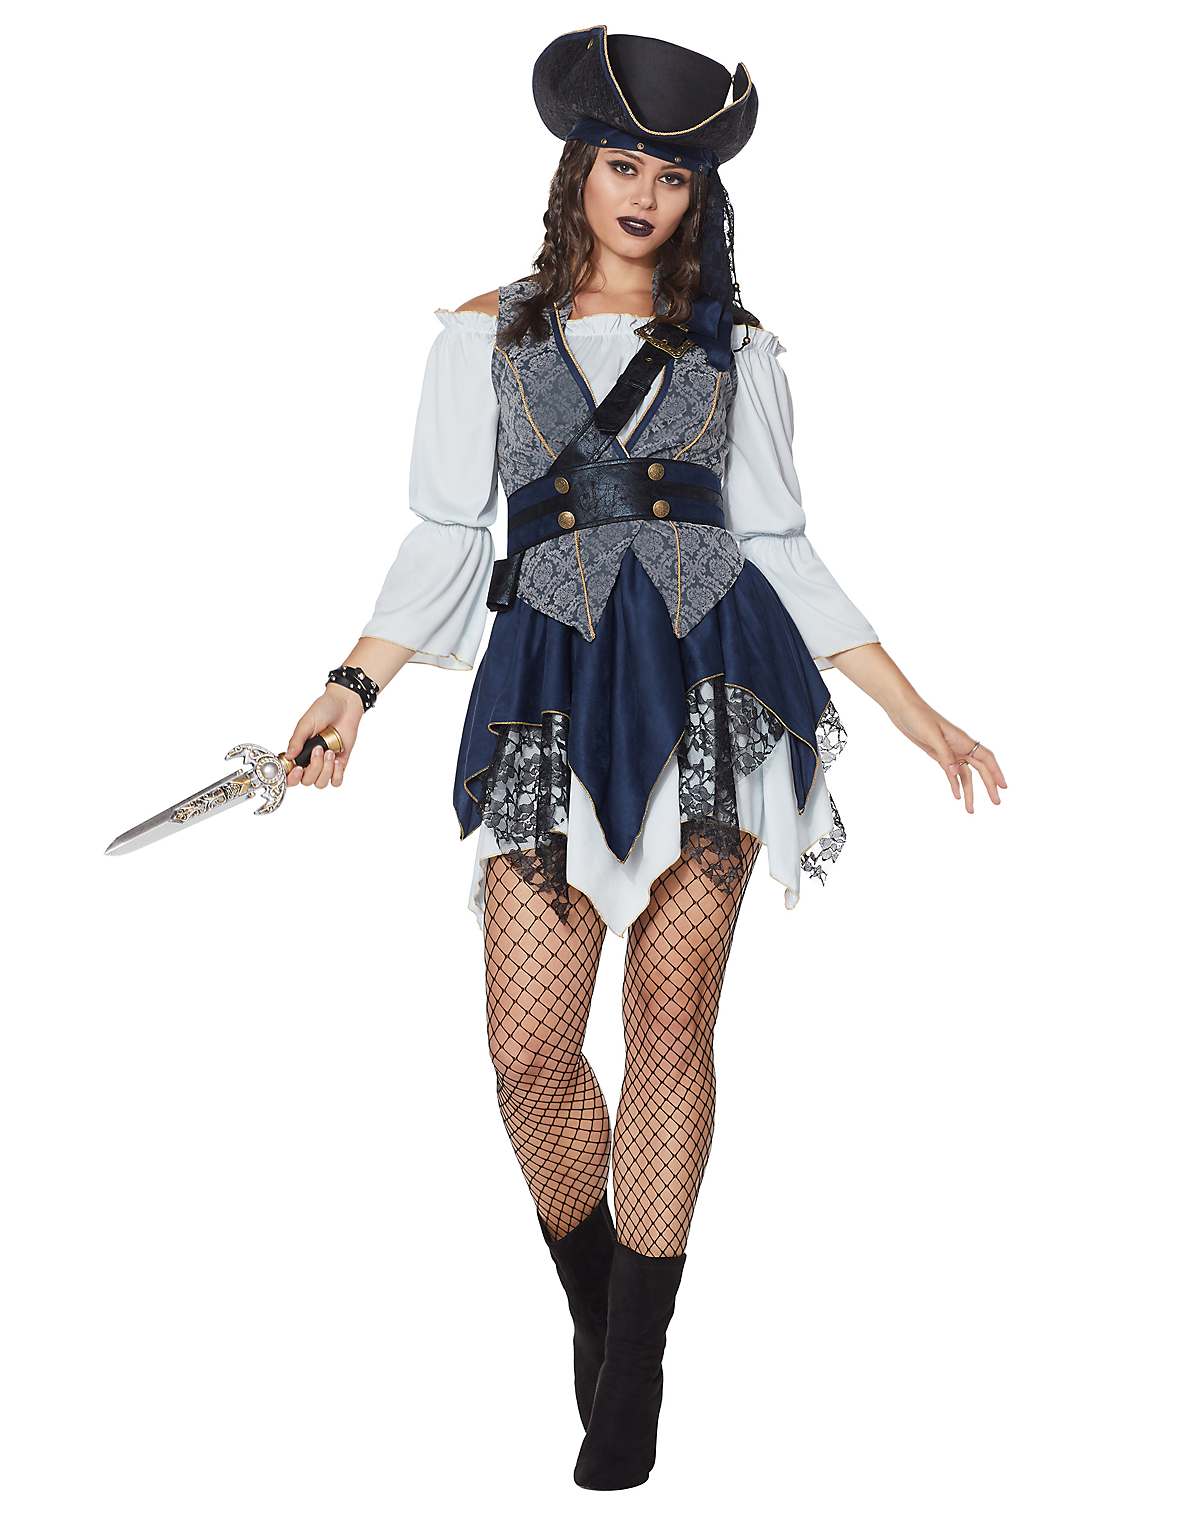 Castaway Beauty Pirate Costume - The Signature Collection